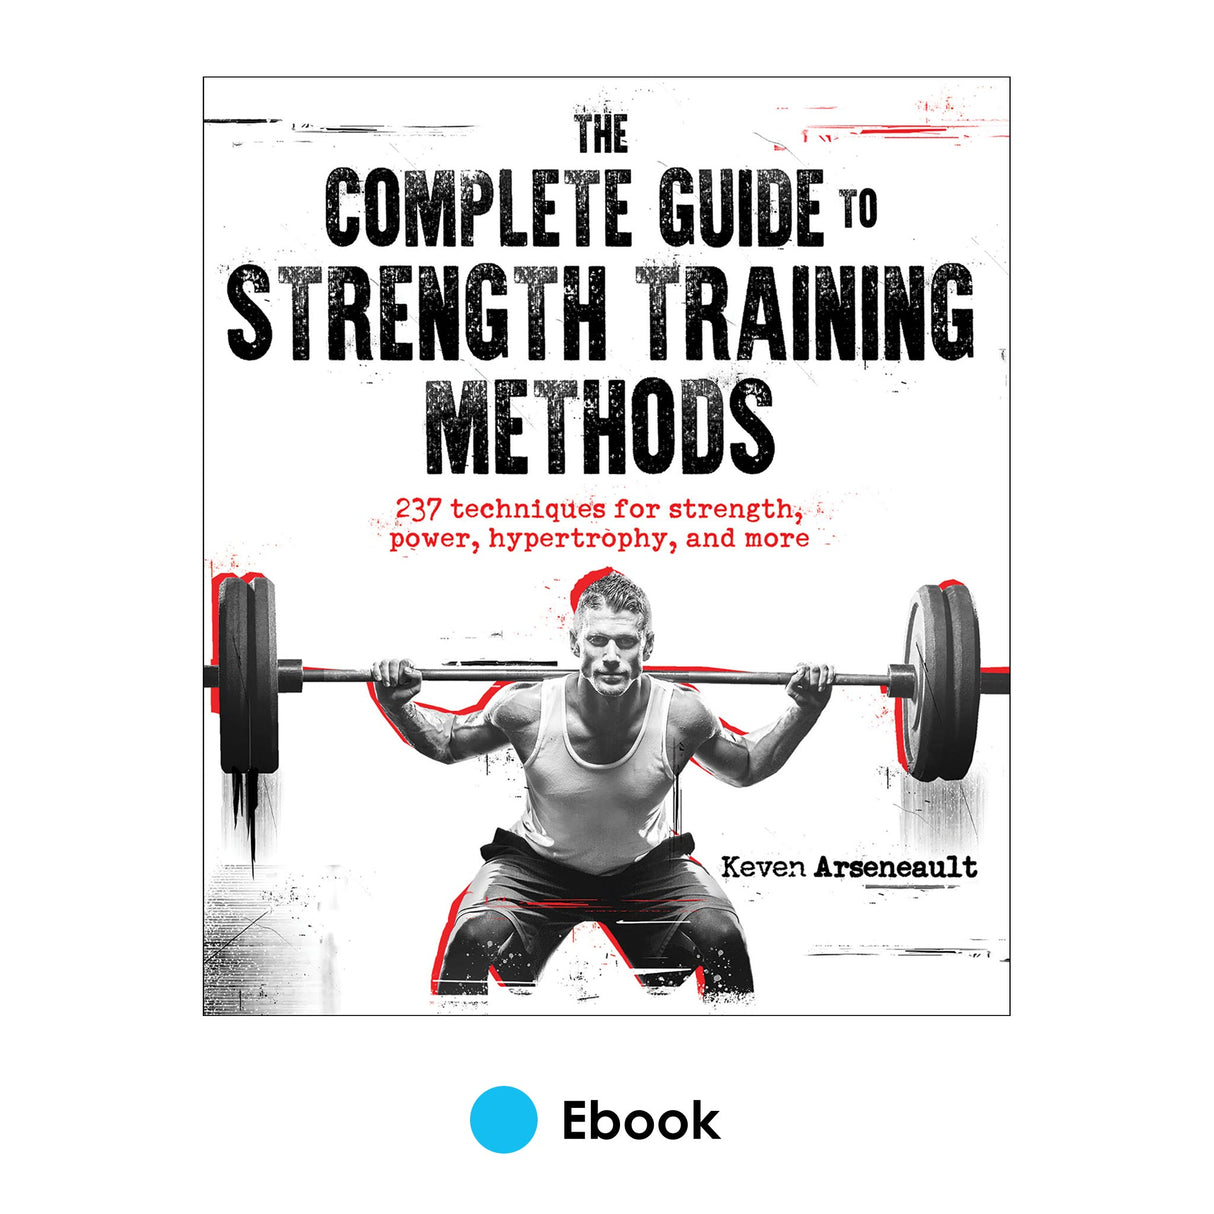 Complete Guide to Strength Training Methods epub, The